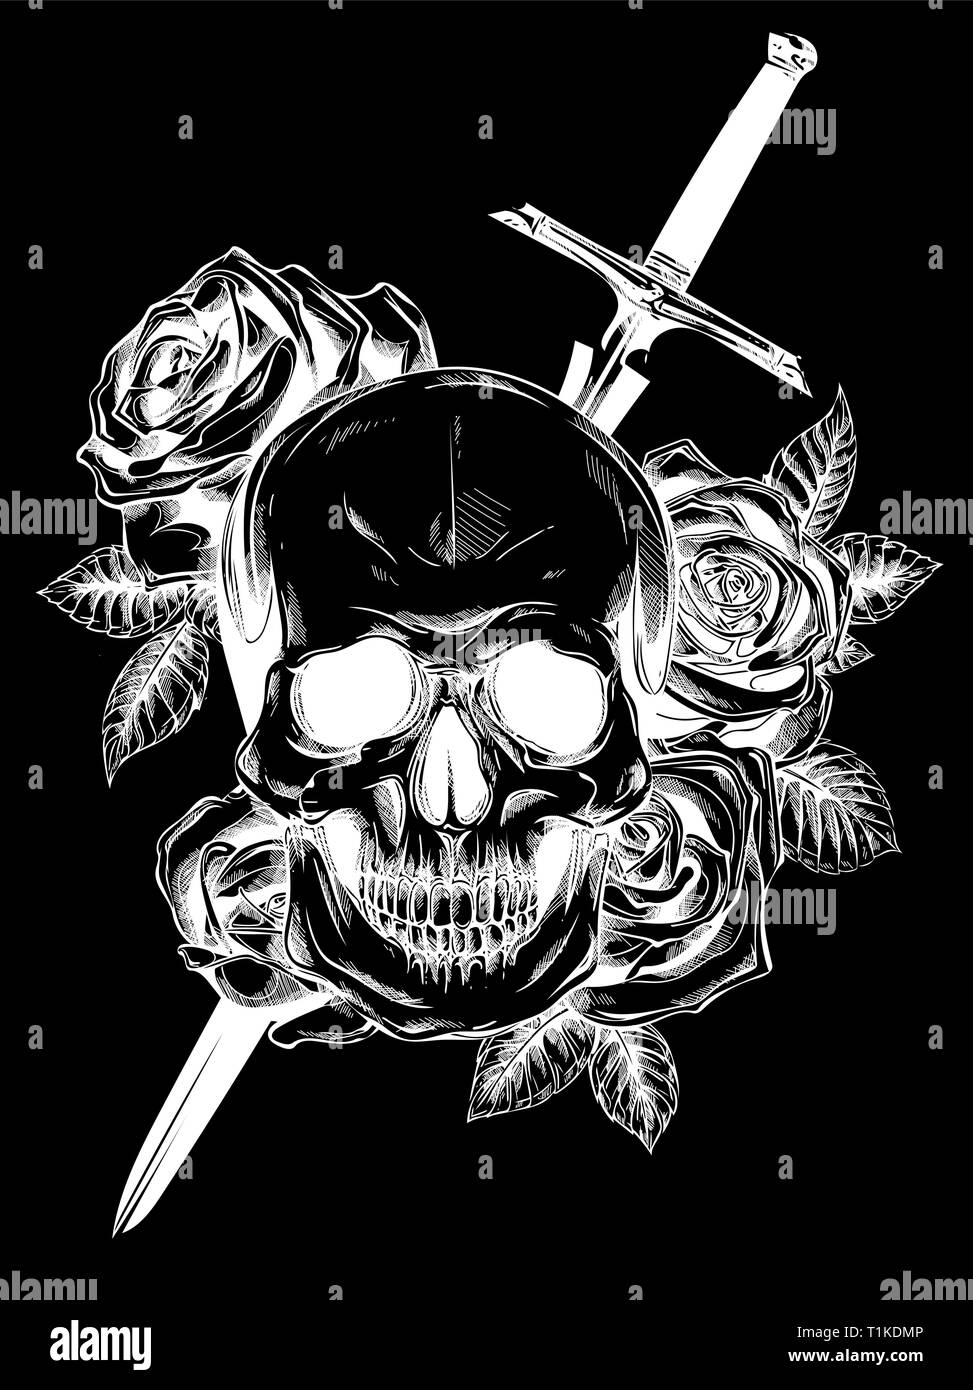 A human skull with roses on black background Stock Vector